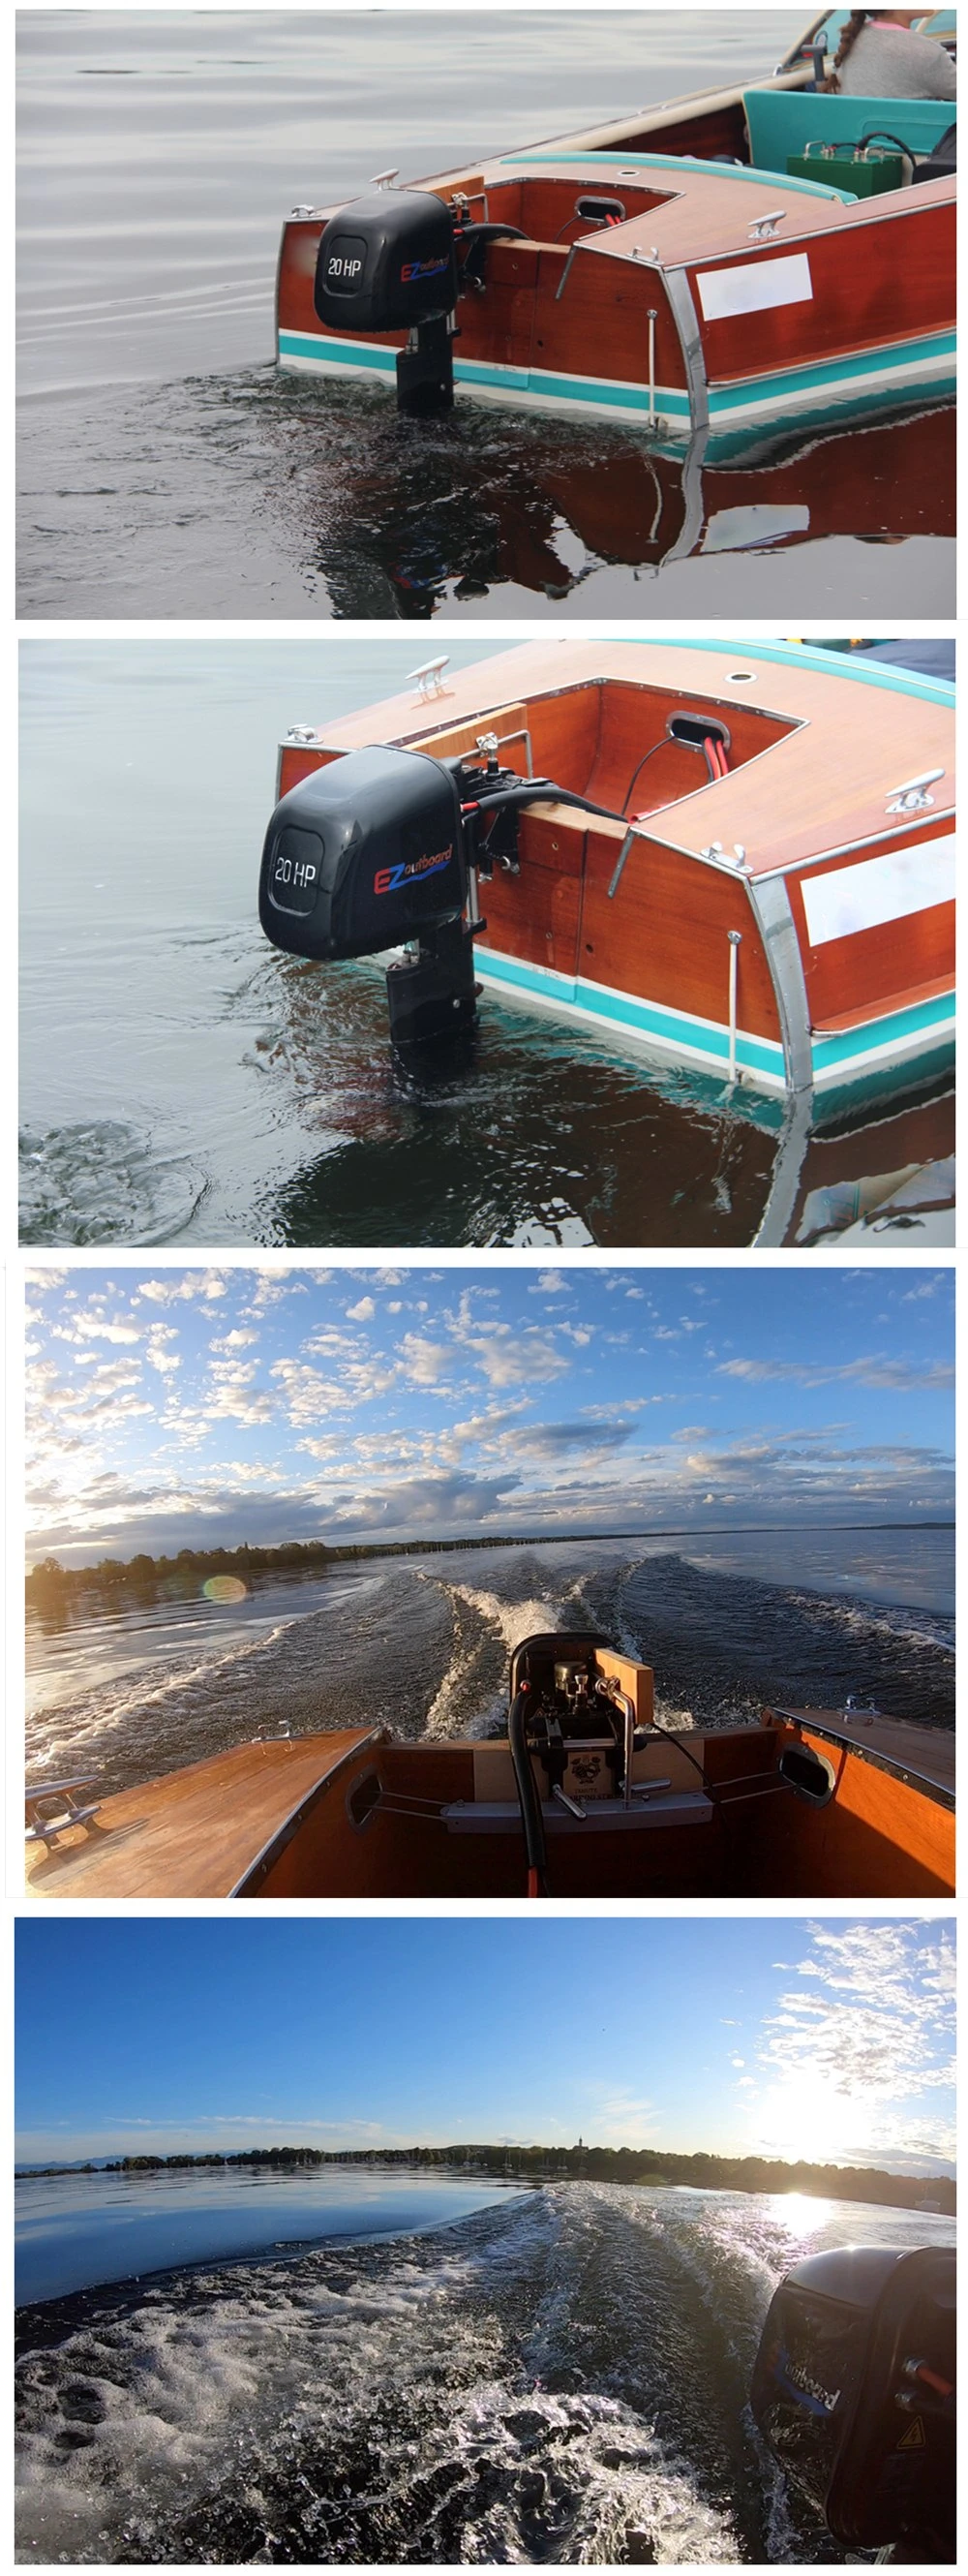 Innovative Technology 10HP Electric Outboard for Fishing Boats, Tender Boats